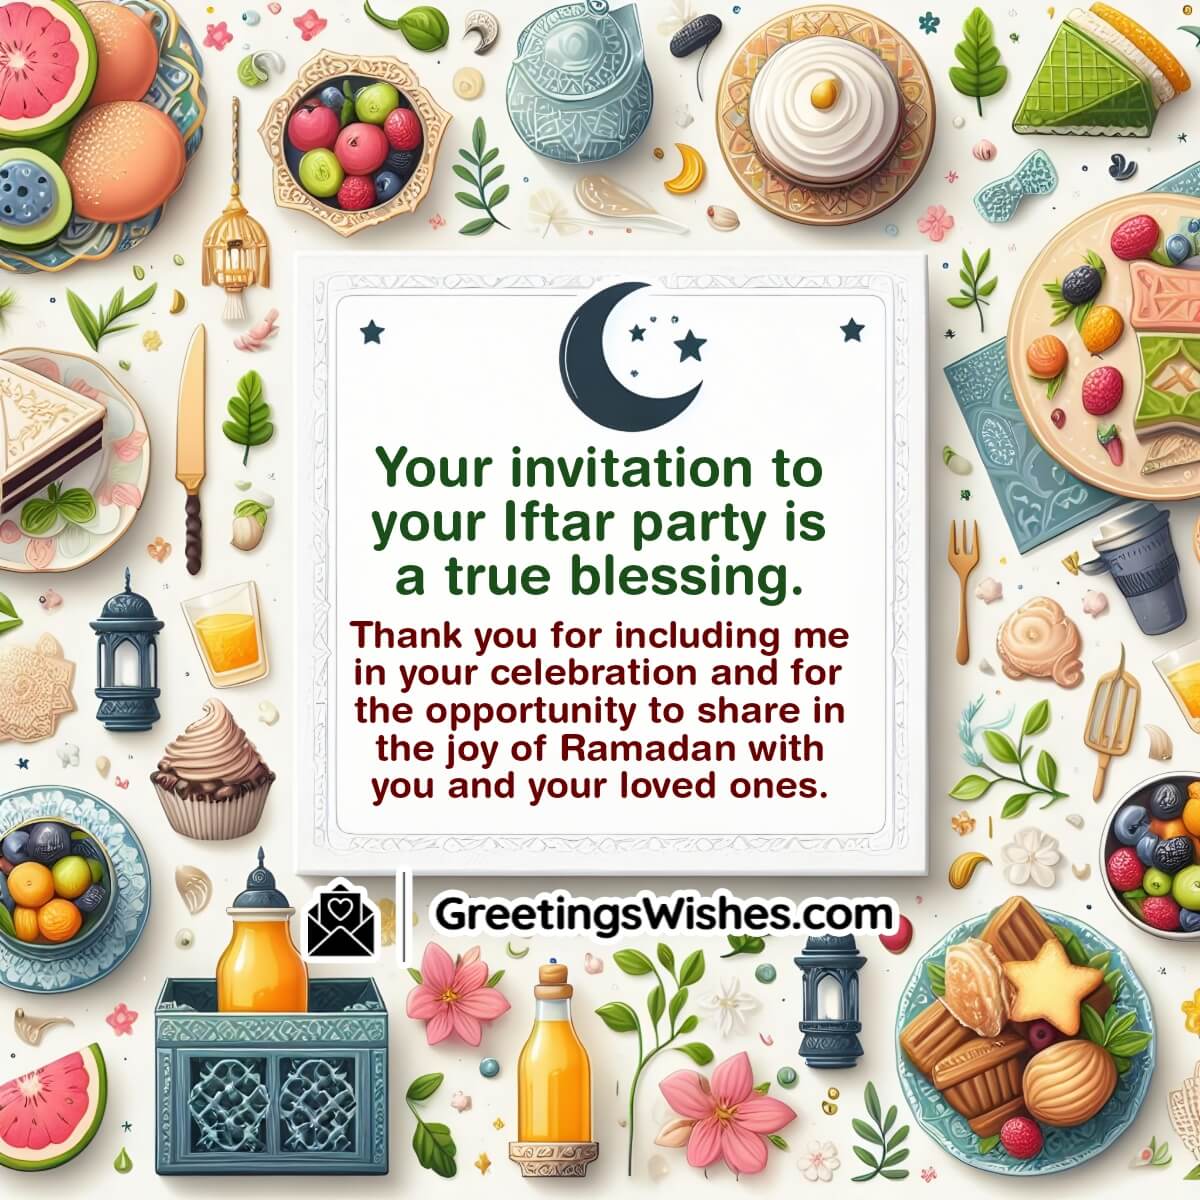 Thank You Message For Iftar Party Invitation